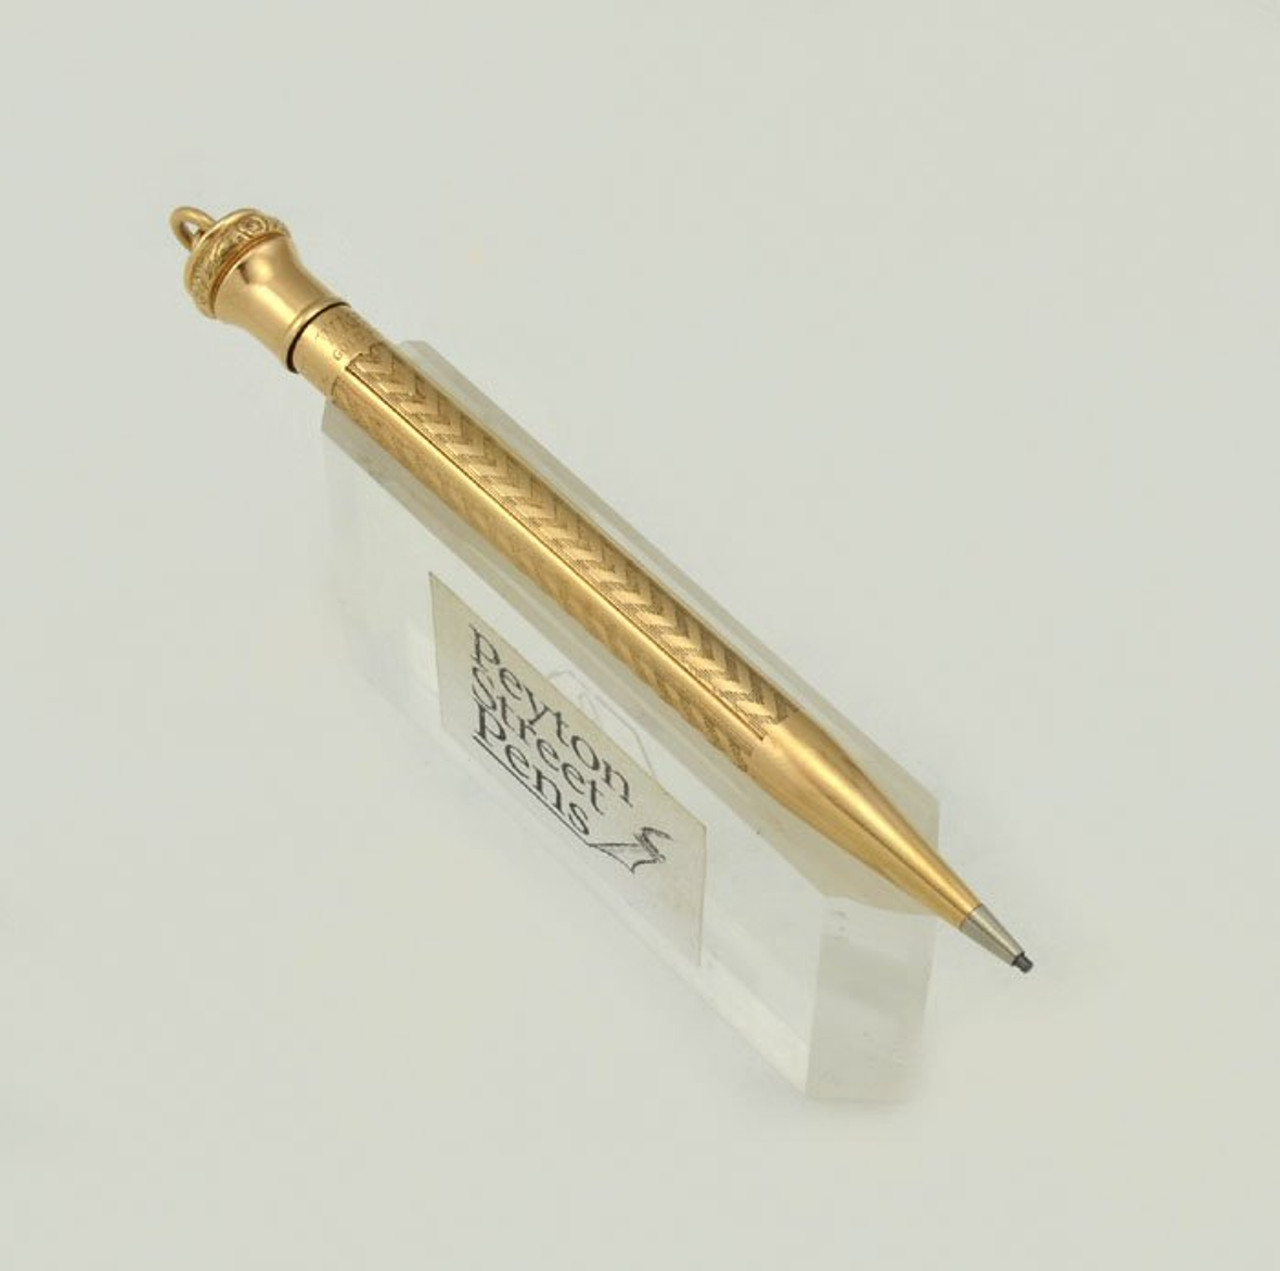 Wahl Eversharp Ring Top Mechanical Pencil - Gold Filled, Chevron Design (Excellent, Works Well)